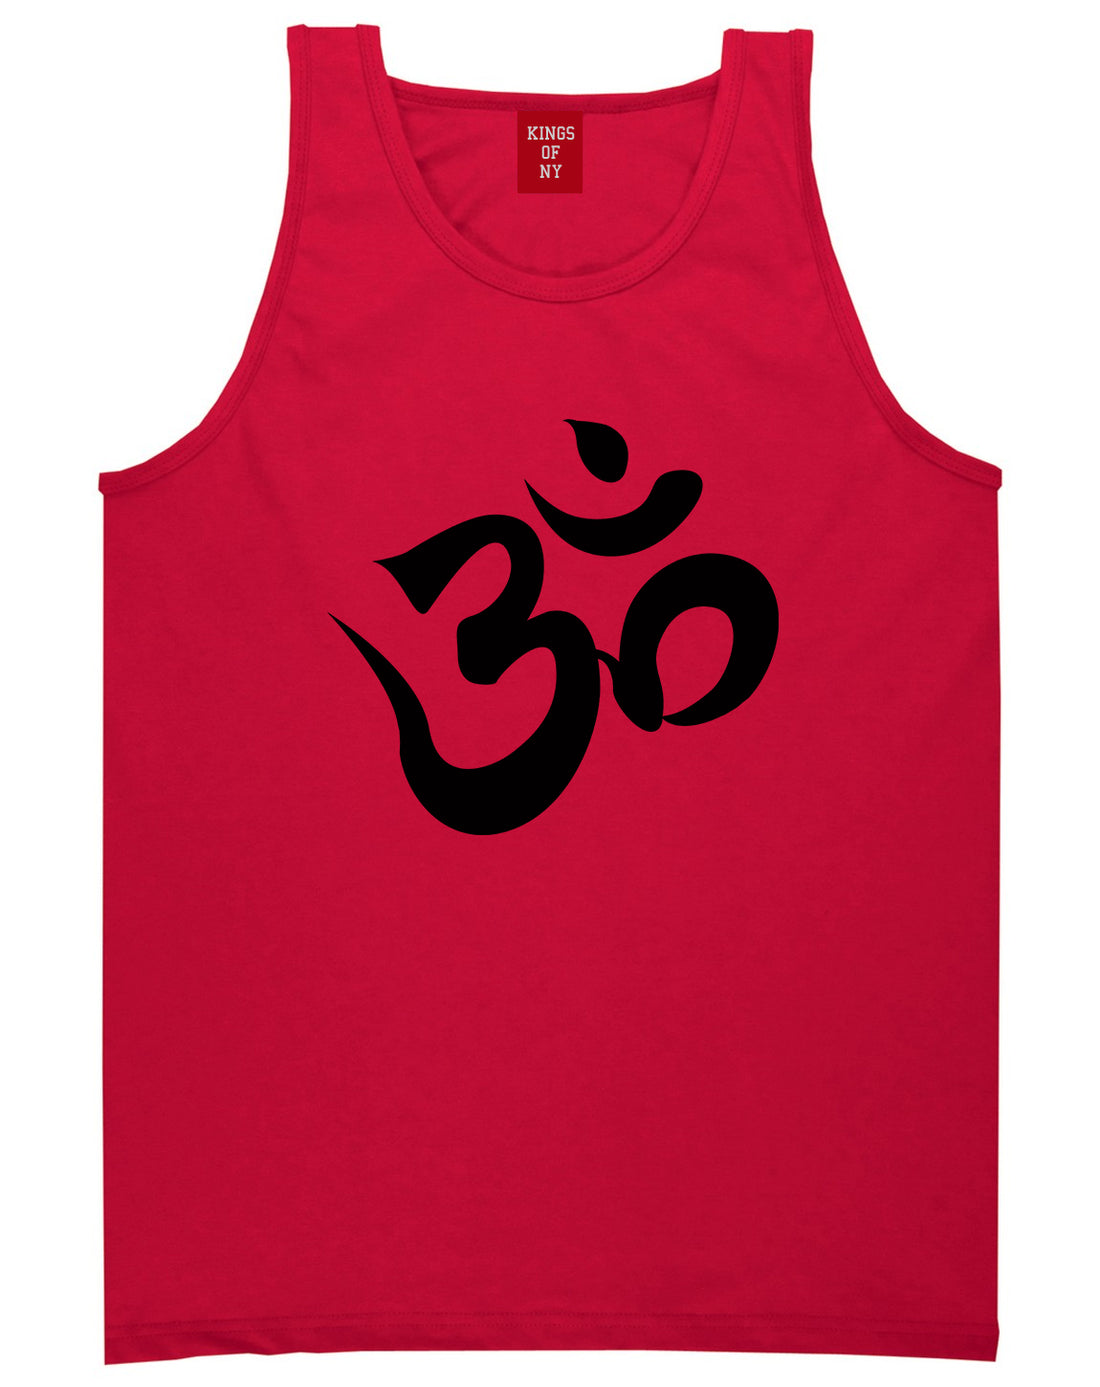 Om Ohm Symbol Red Tank Top Shirt by Kings Of NY